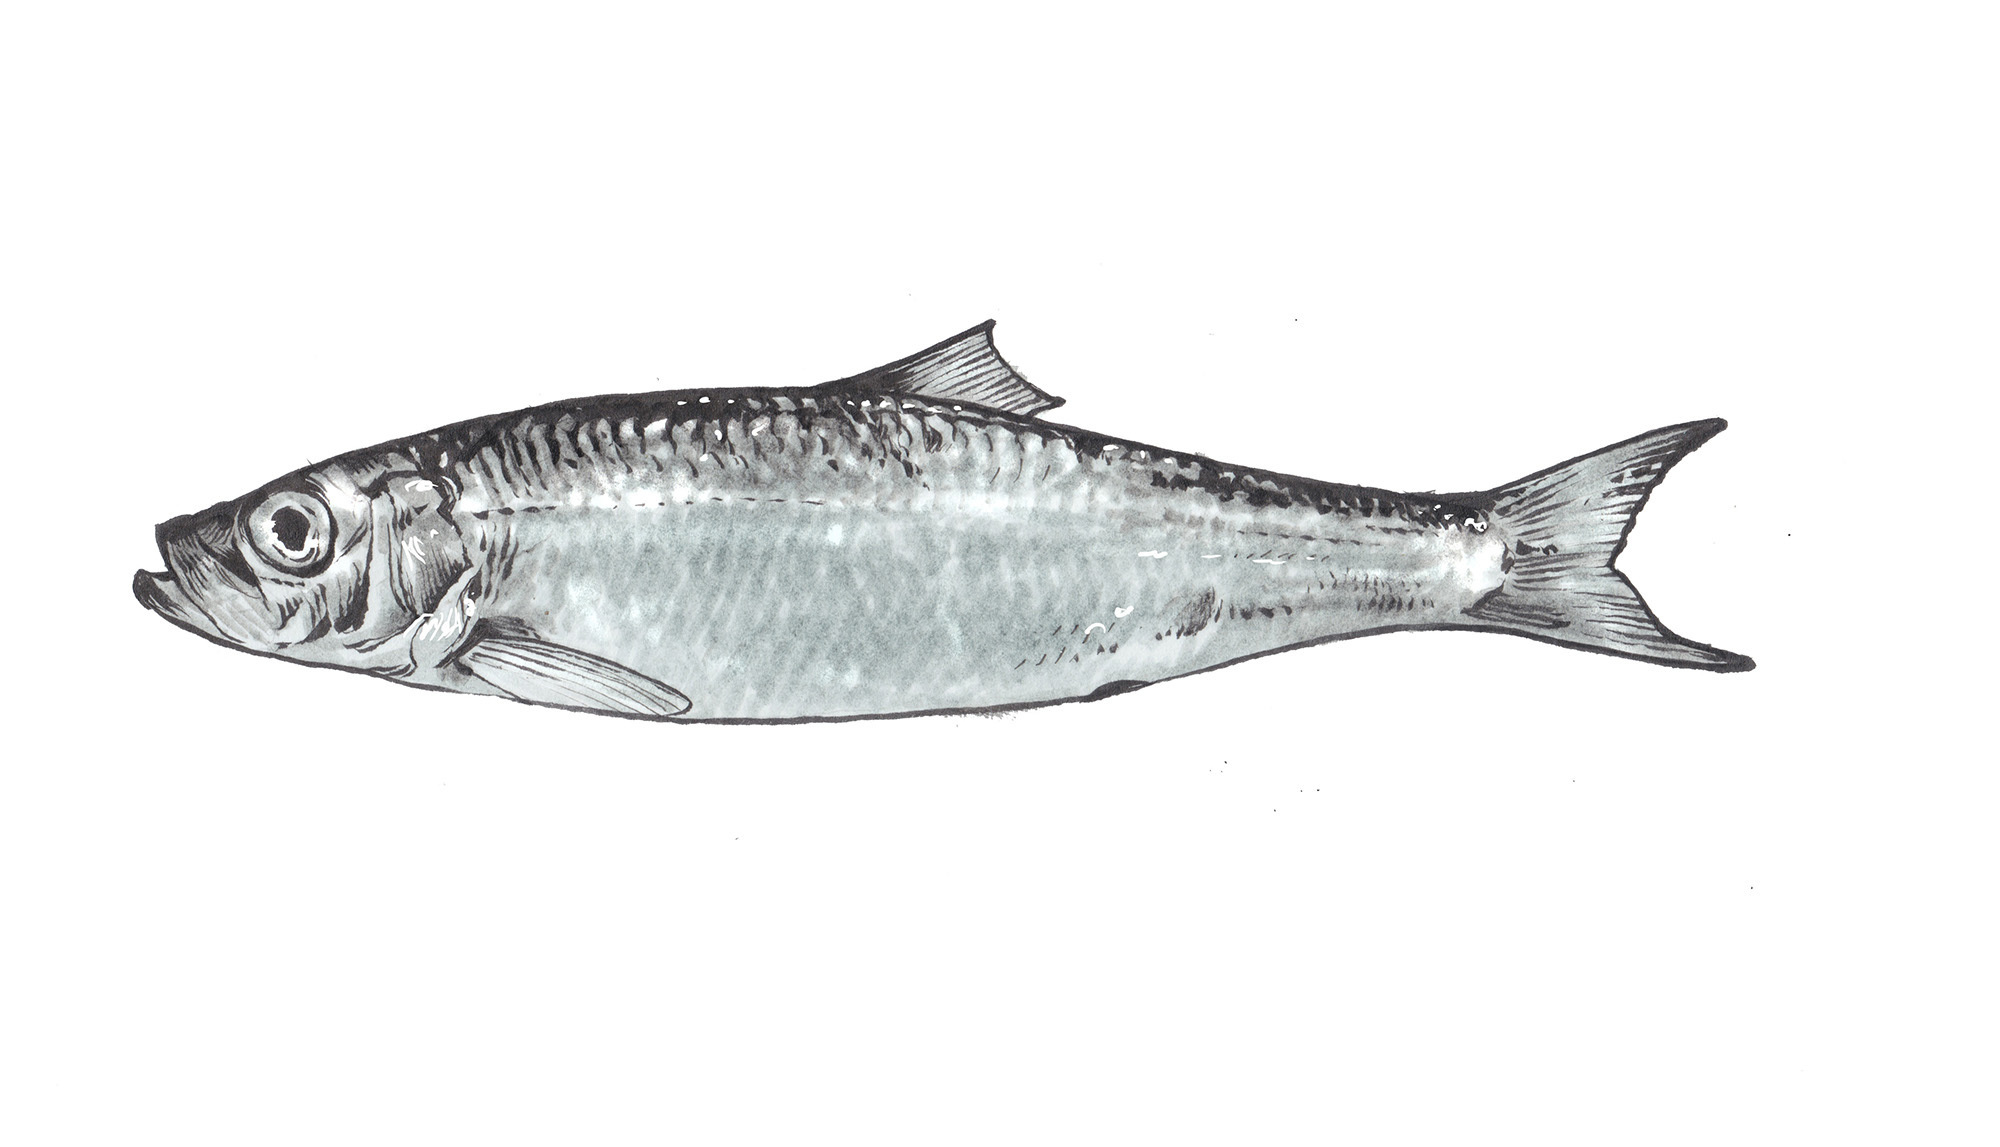 The Pacific herring. Lombard advises using cast nets to catch this fish during its spawning season in the winter.